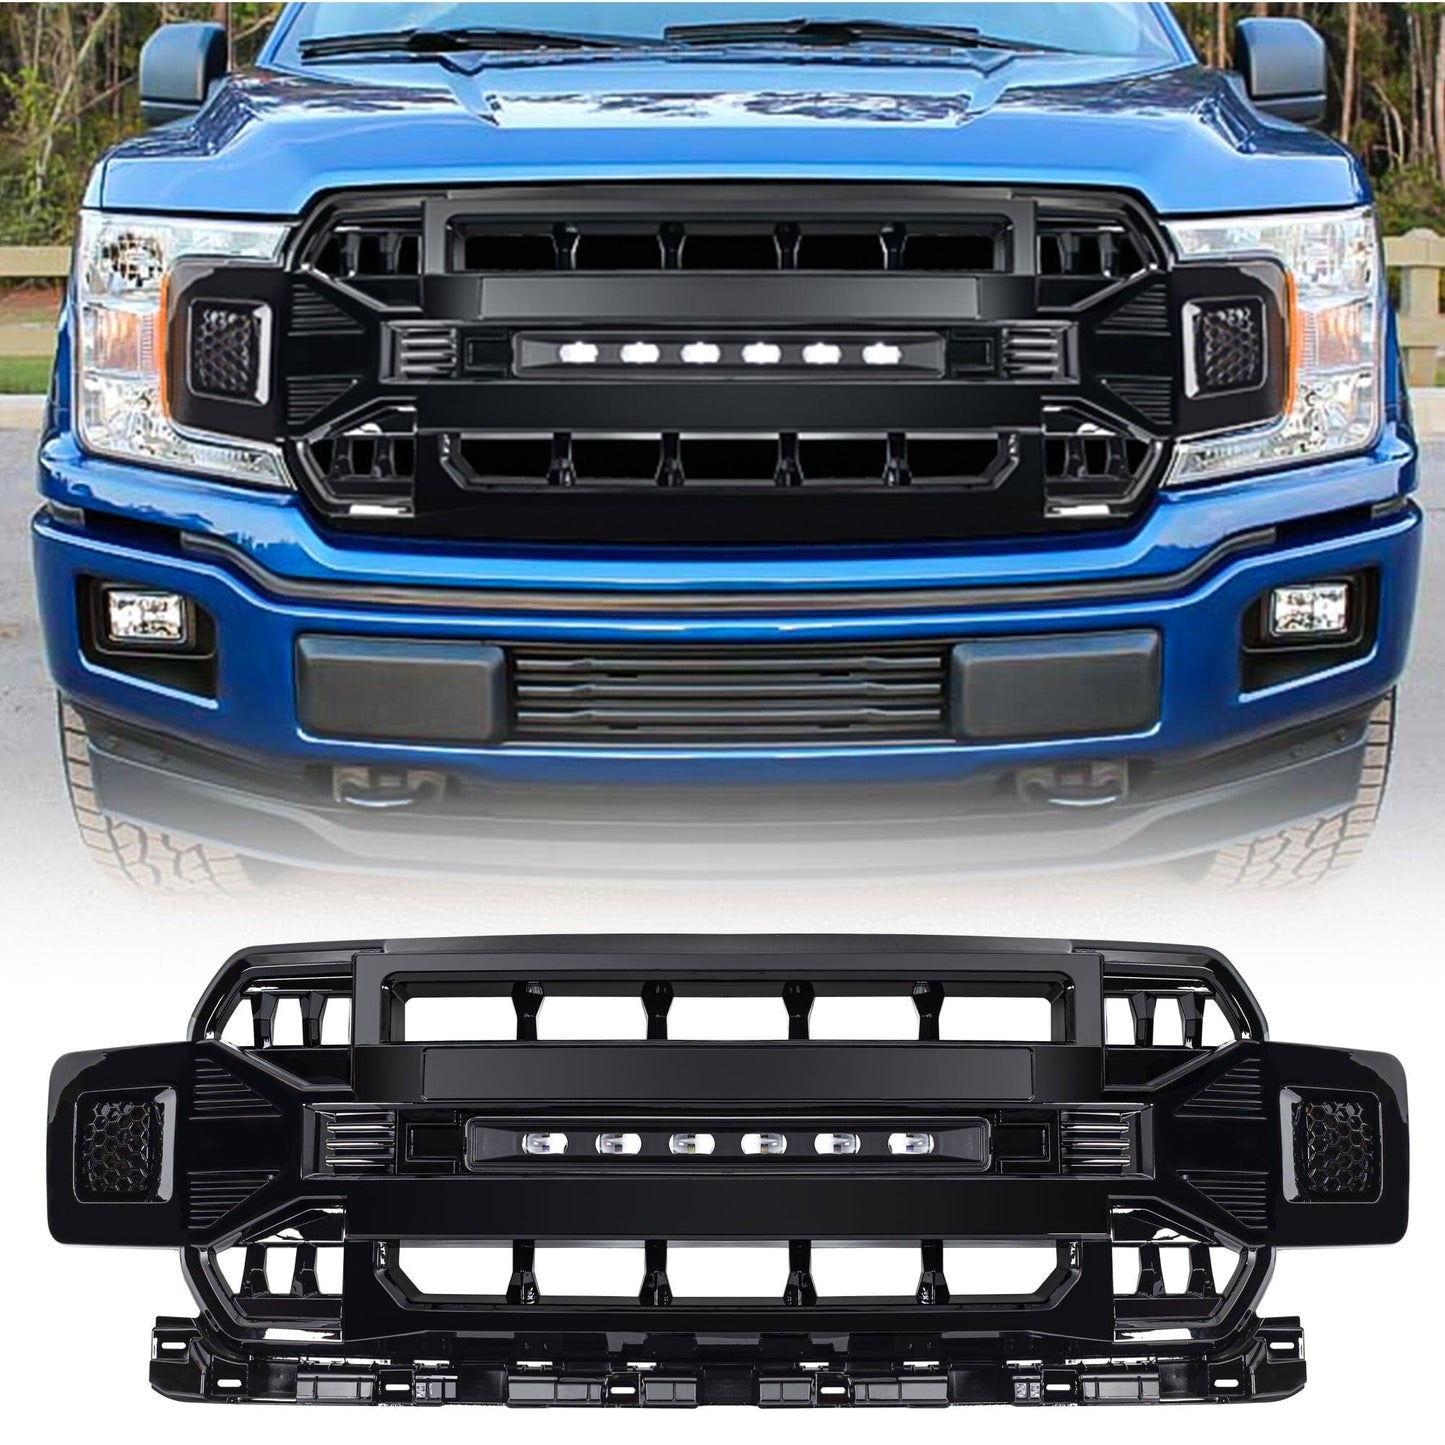 Armor Grille W/Off-Road Lights -Glossy Black For 2018-2020 Ford F150| Amoffroad